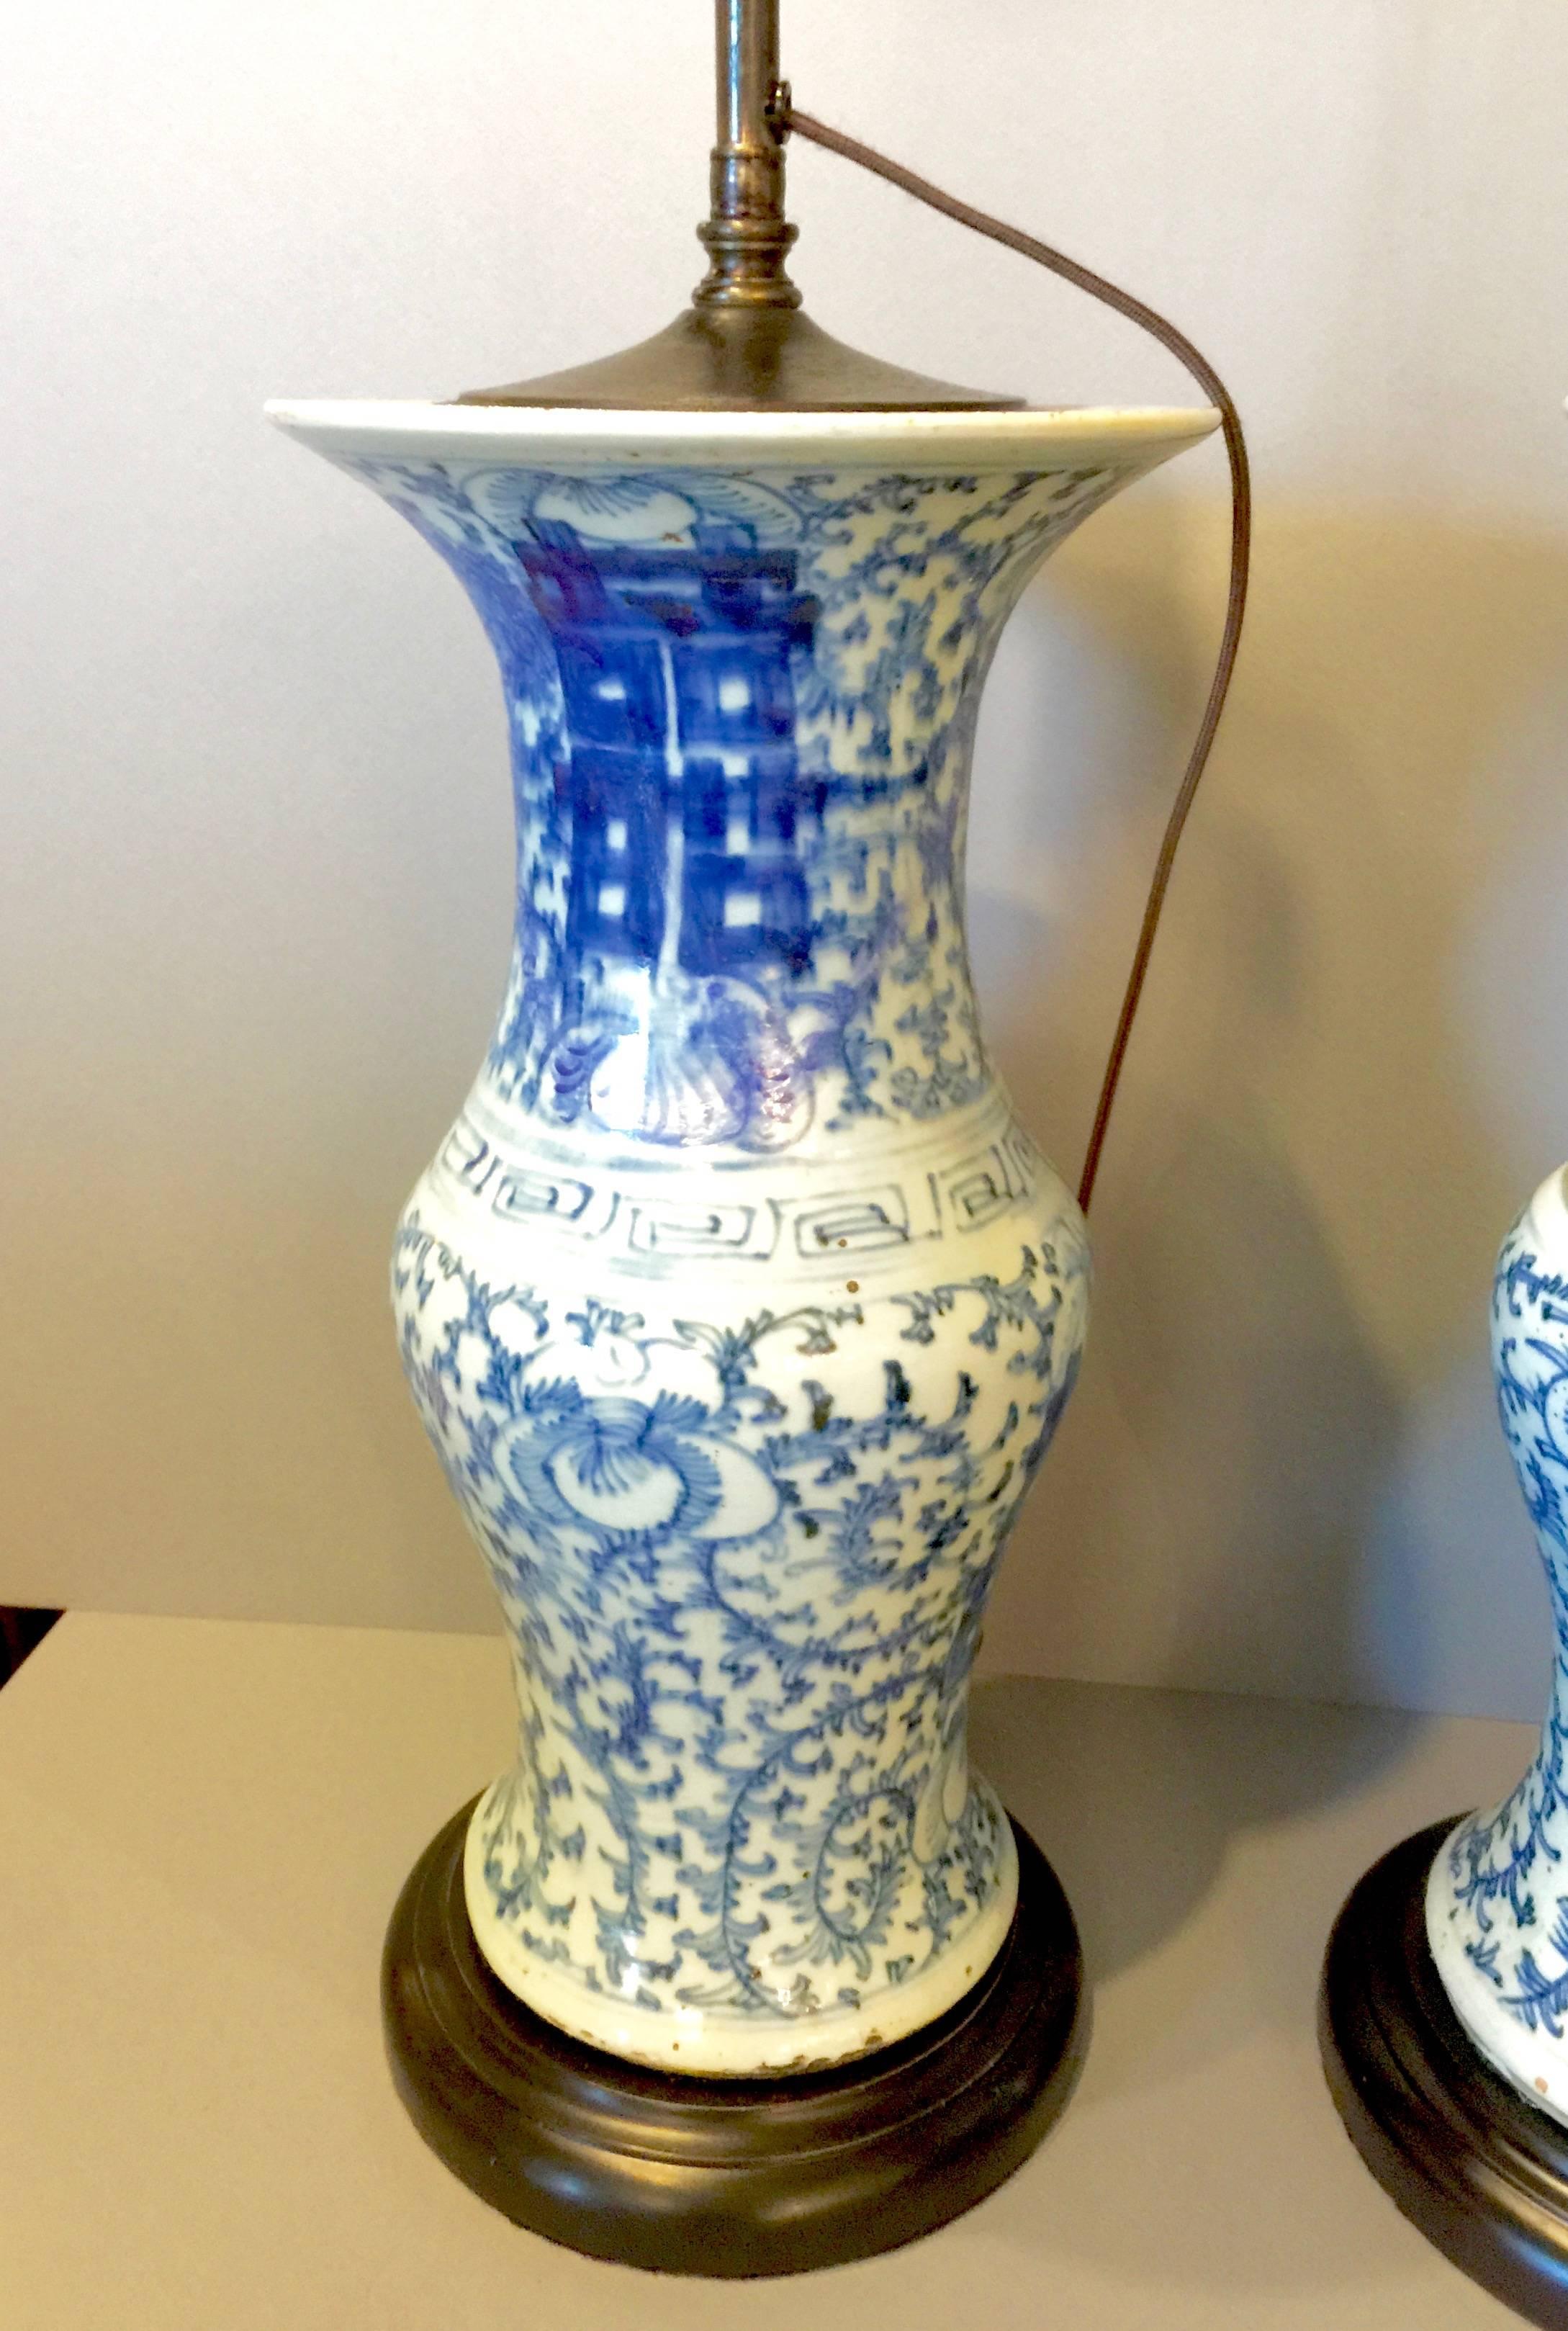 This is an iconic pair of Chinese blue and white vases that date to the late Ching period. They are recently mounted as lamps with a French wire so as not to drill the vases. The vases are of the same size and pattern, though not identical. One of